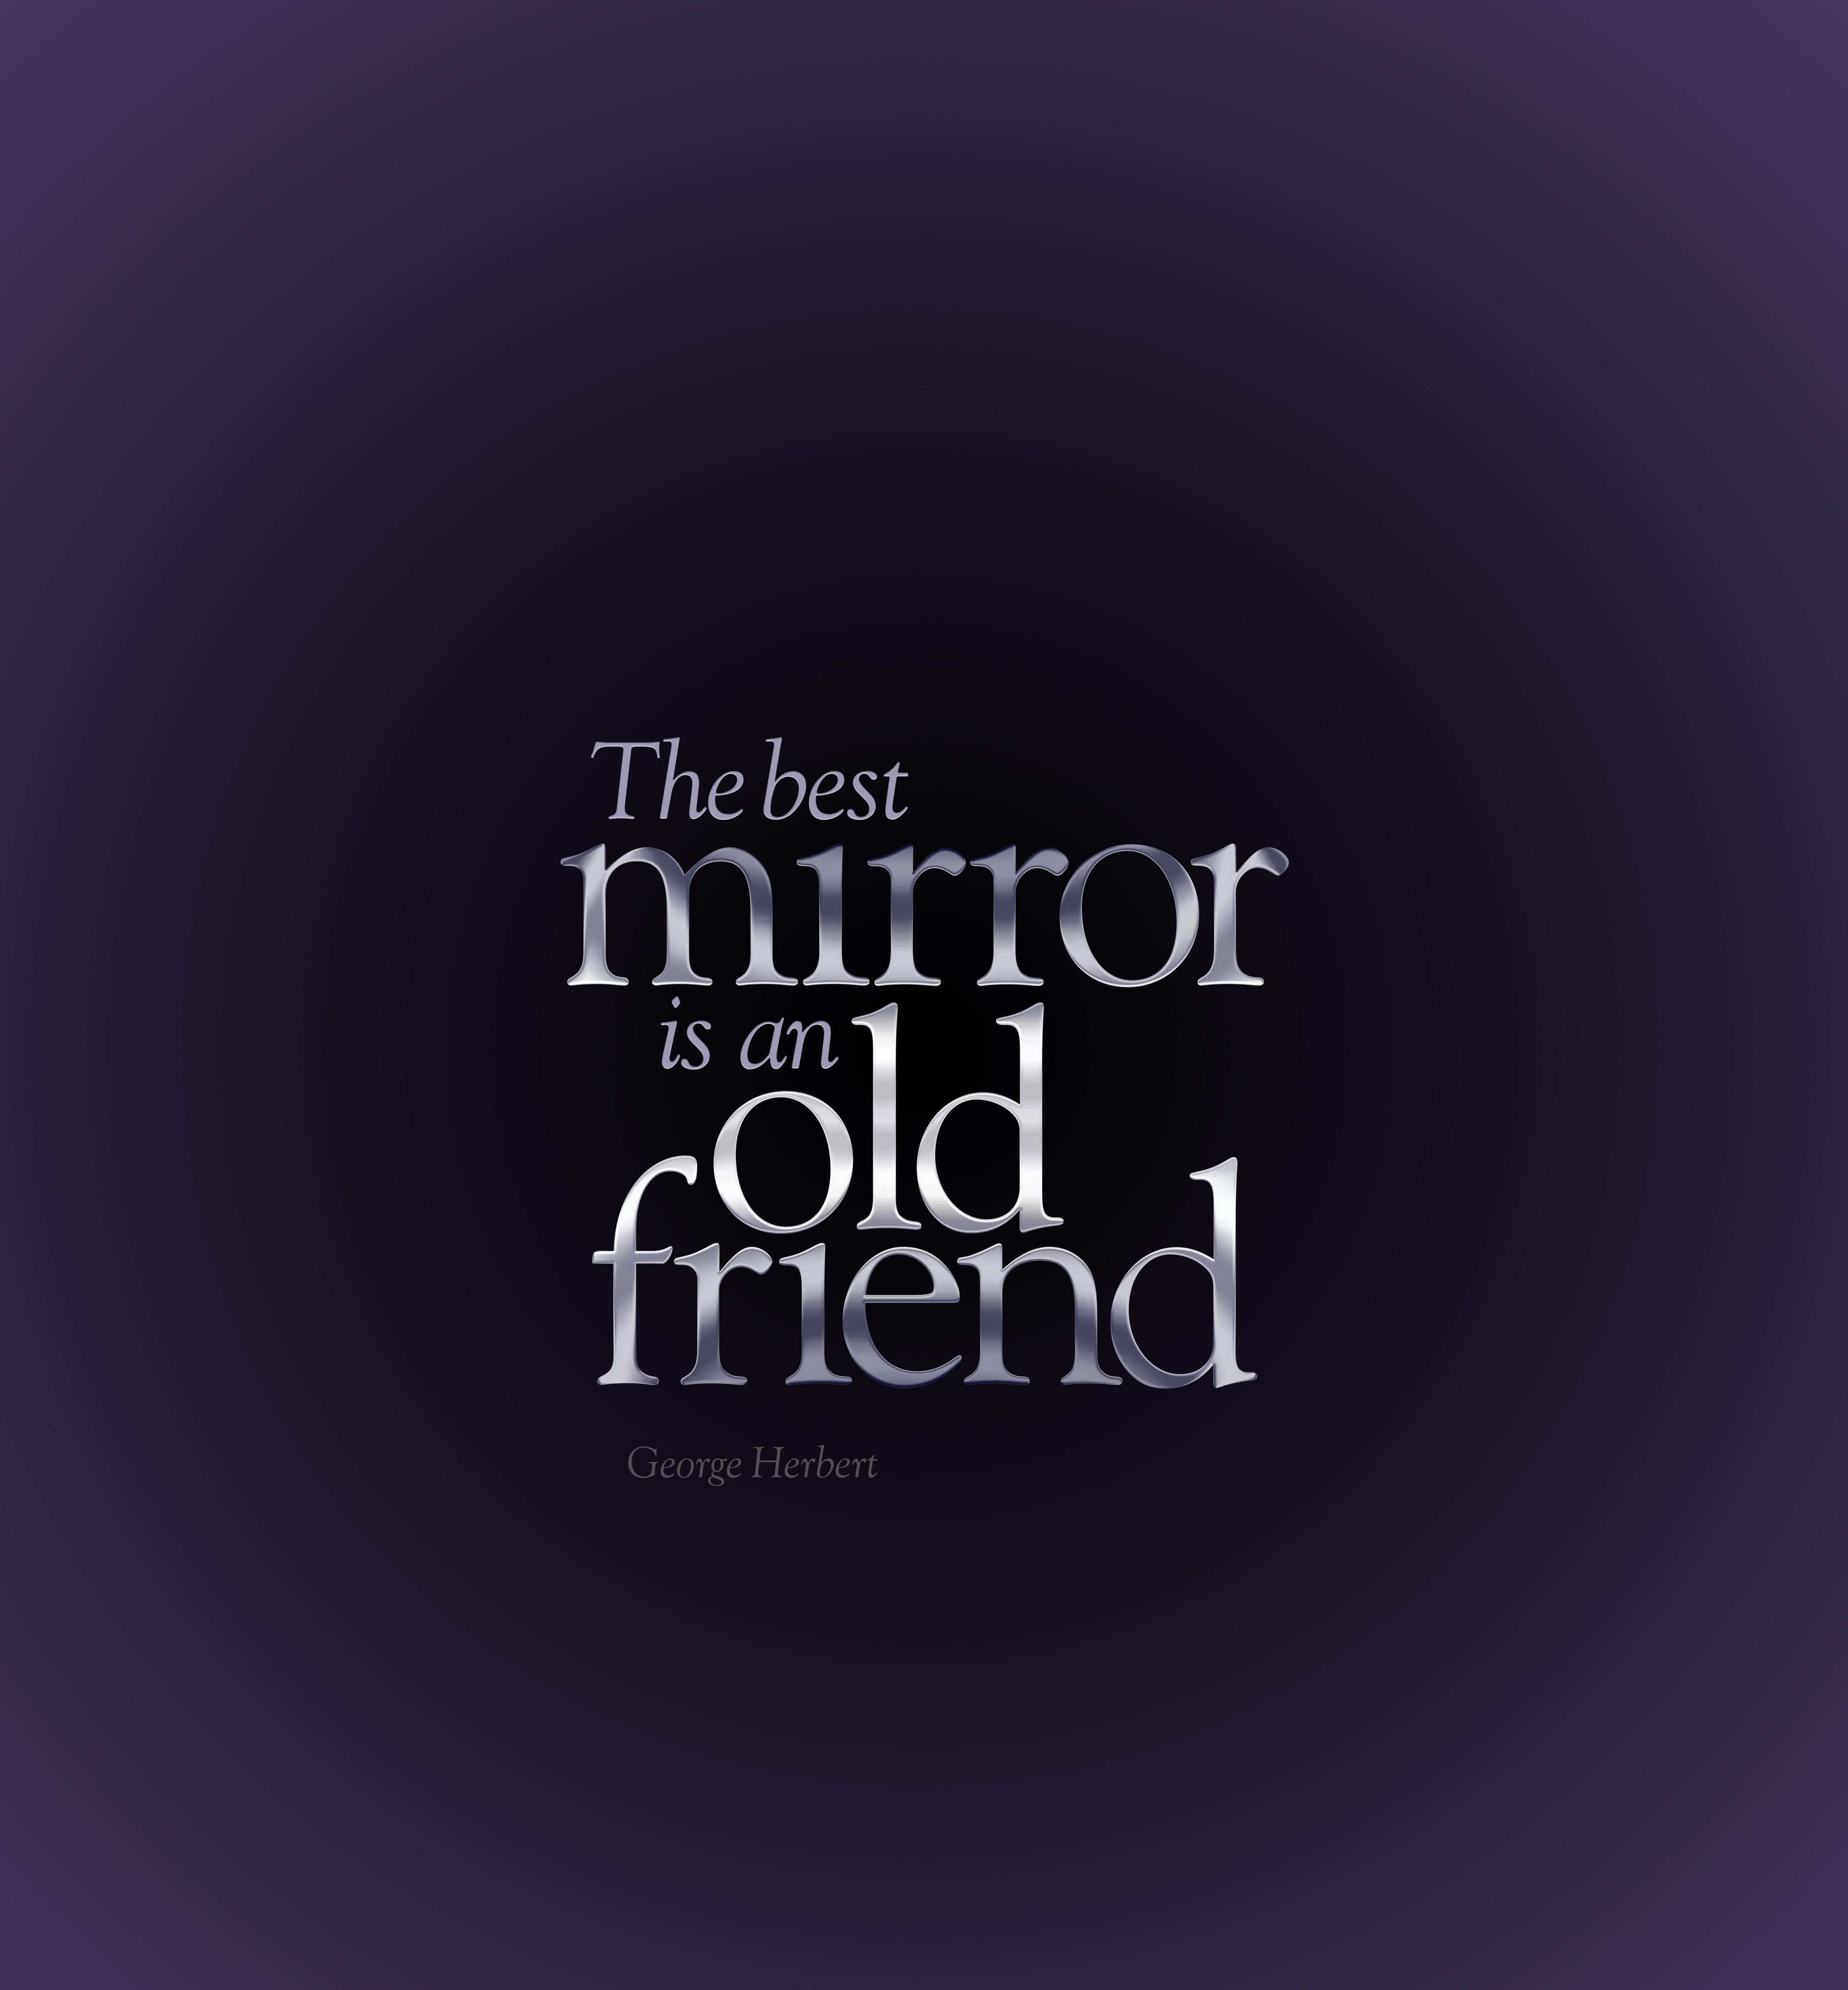 Friendship utterance, quotation, mirror, quote 8k Backgrounds